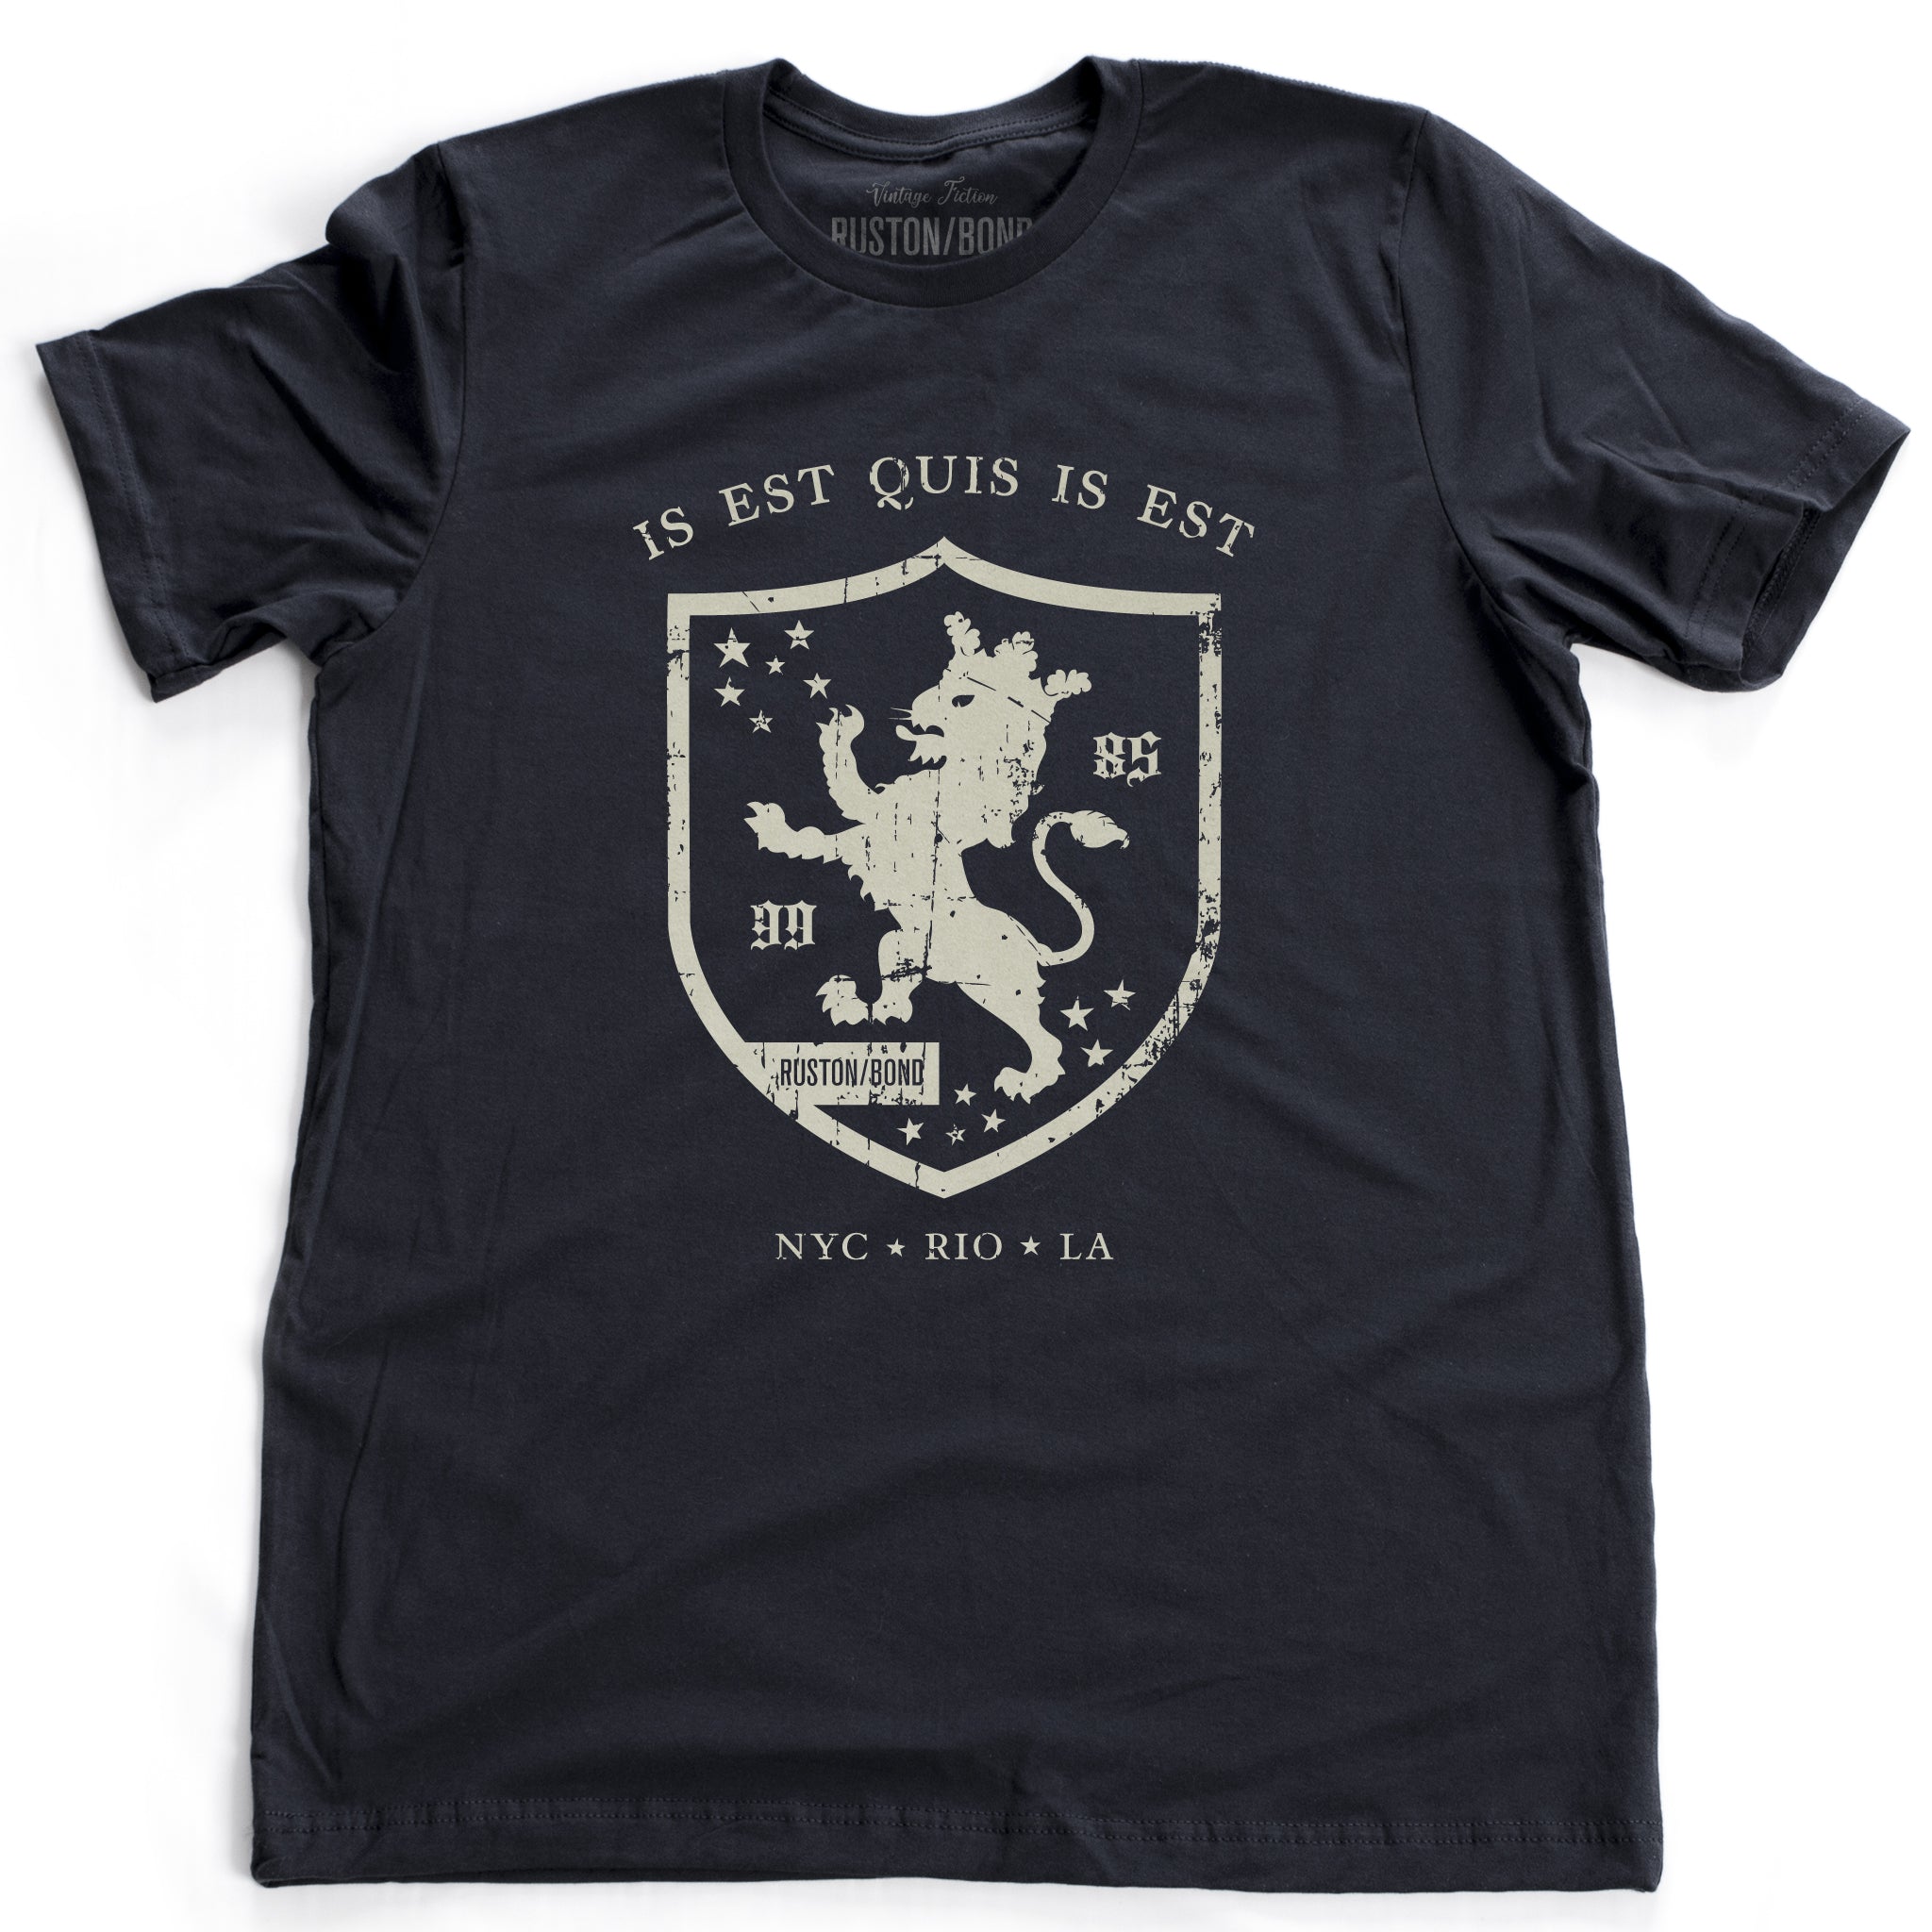 A retro, vintage-inspired fashion t-shirt in classic Navy Blue, with an medieval graphic of a lion within a shield,surrounded by the sarcastic text in Latin “it is what it is,” and New York, Rio, Los Angeles at the bottom. By fashion brand Ruston/Bond, from wolfsaint.net